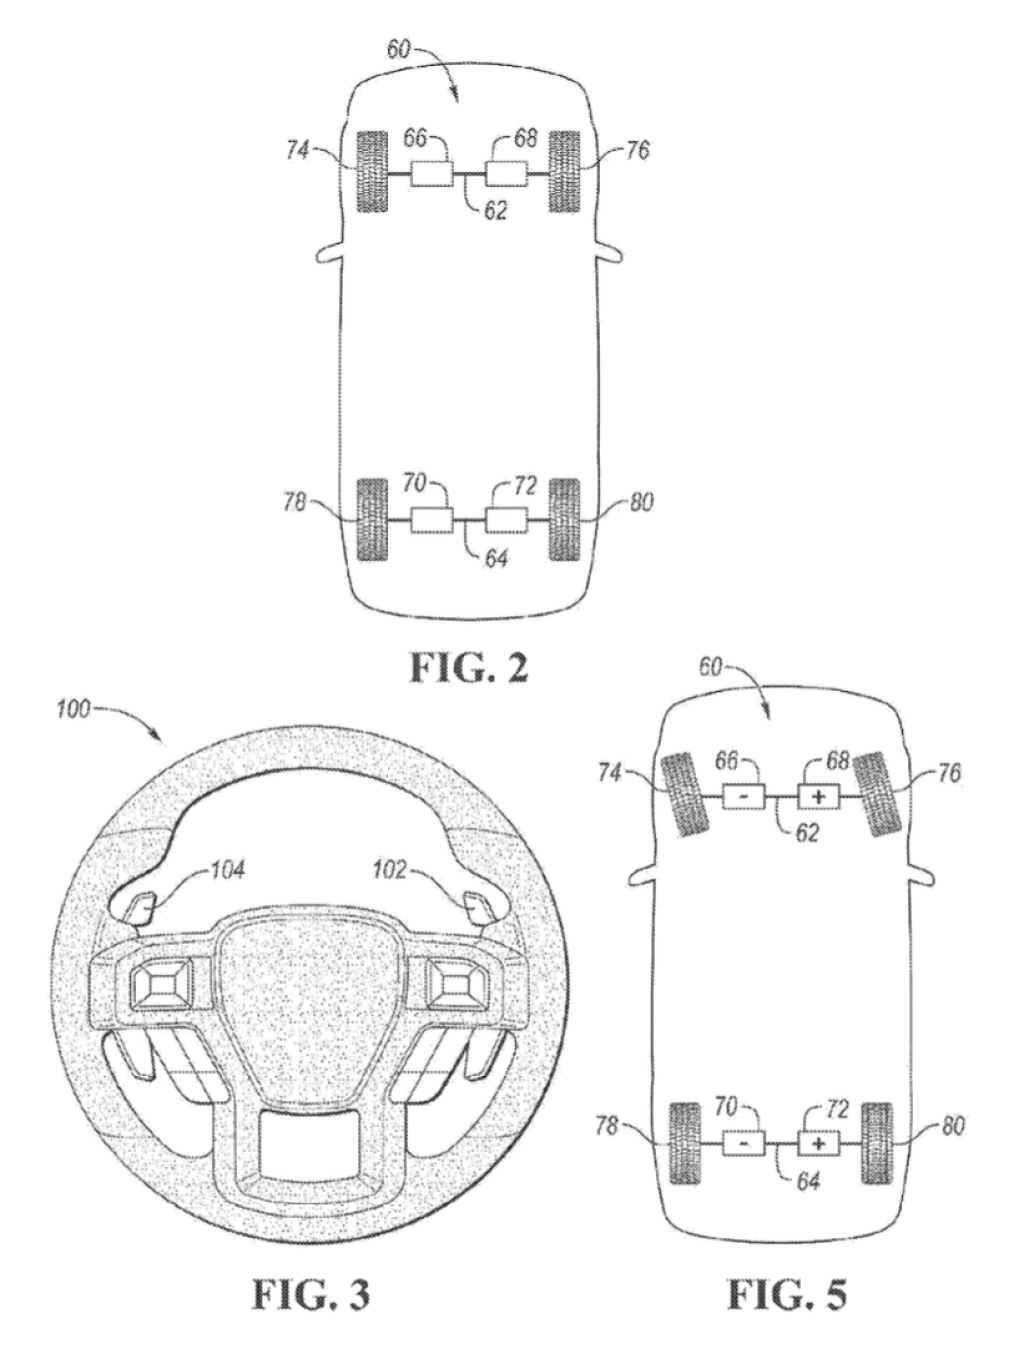 Picture of: Ford Patent Filed For Manual Torque Vectoring System